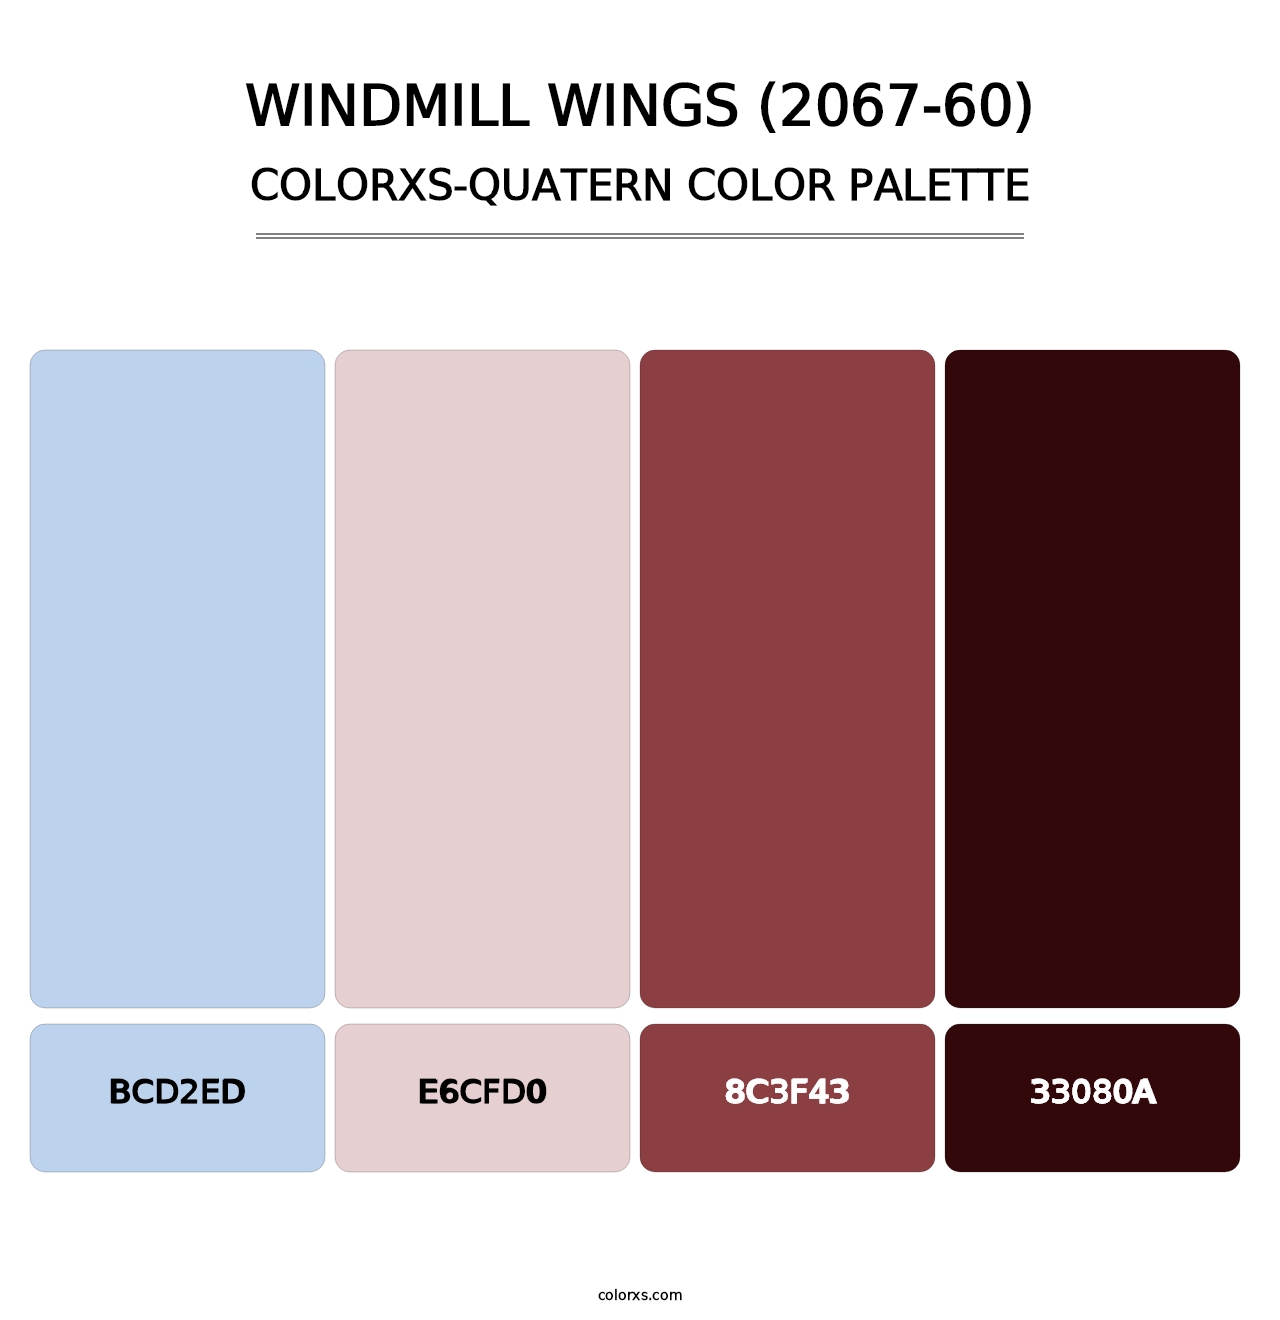 Windmill Wings (2067-60) - Colorxs Quatern Palette